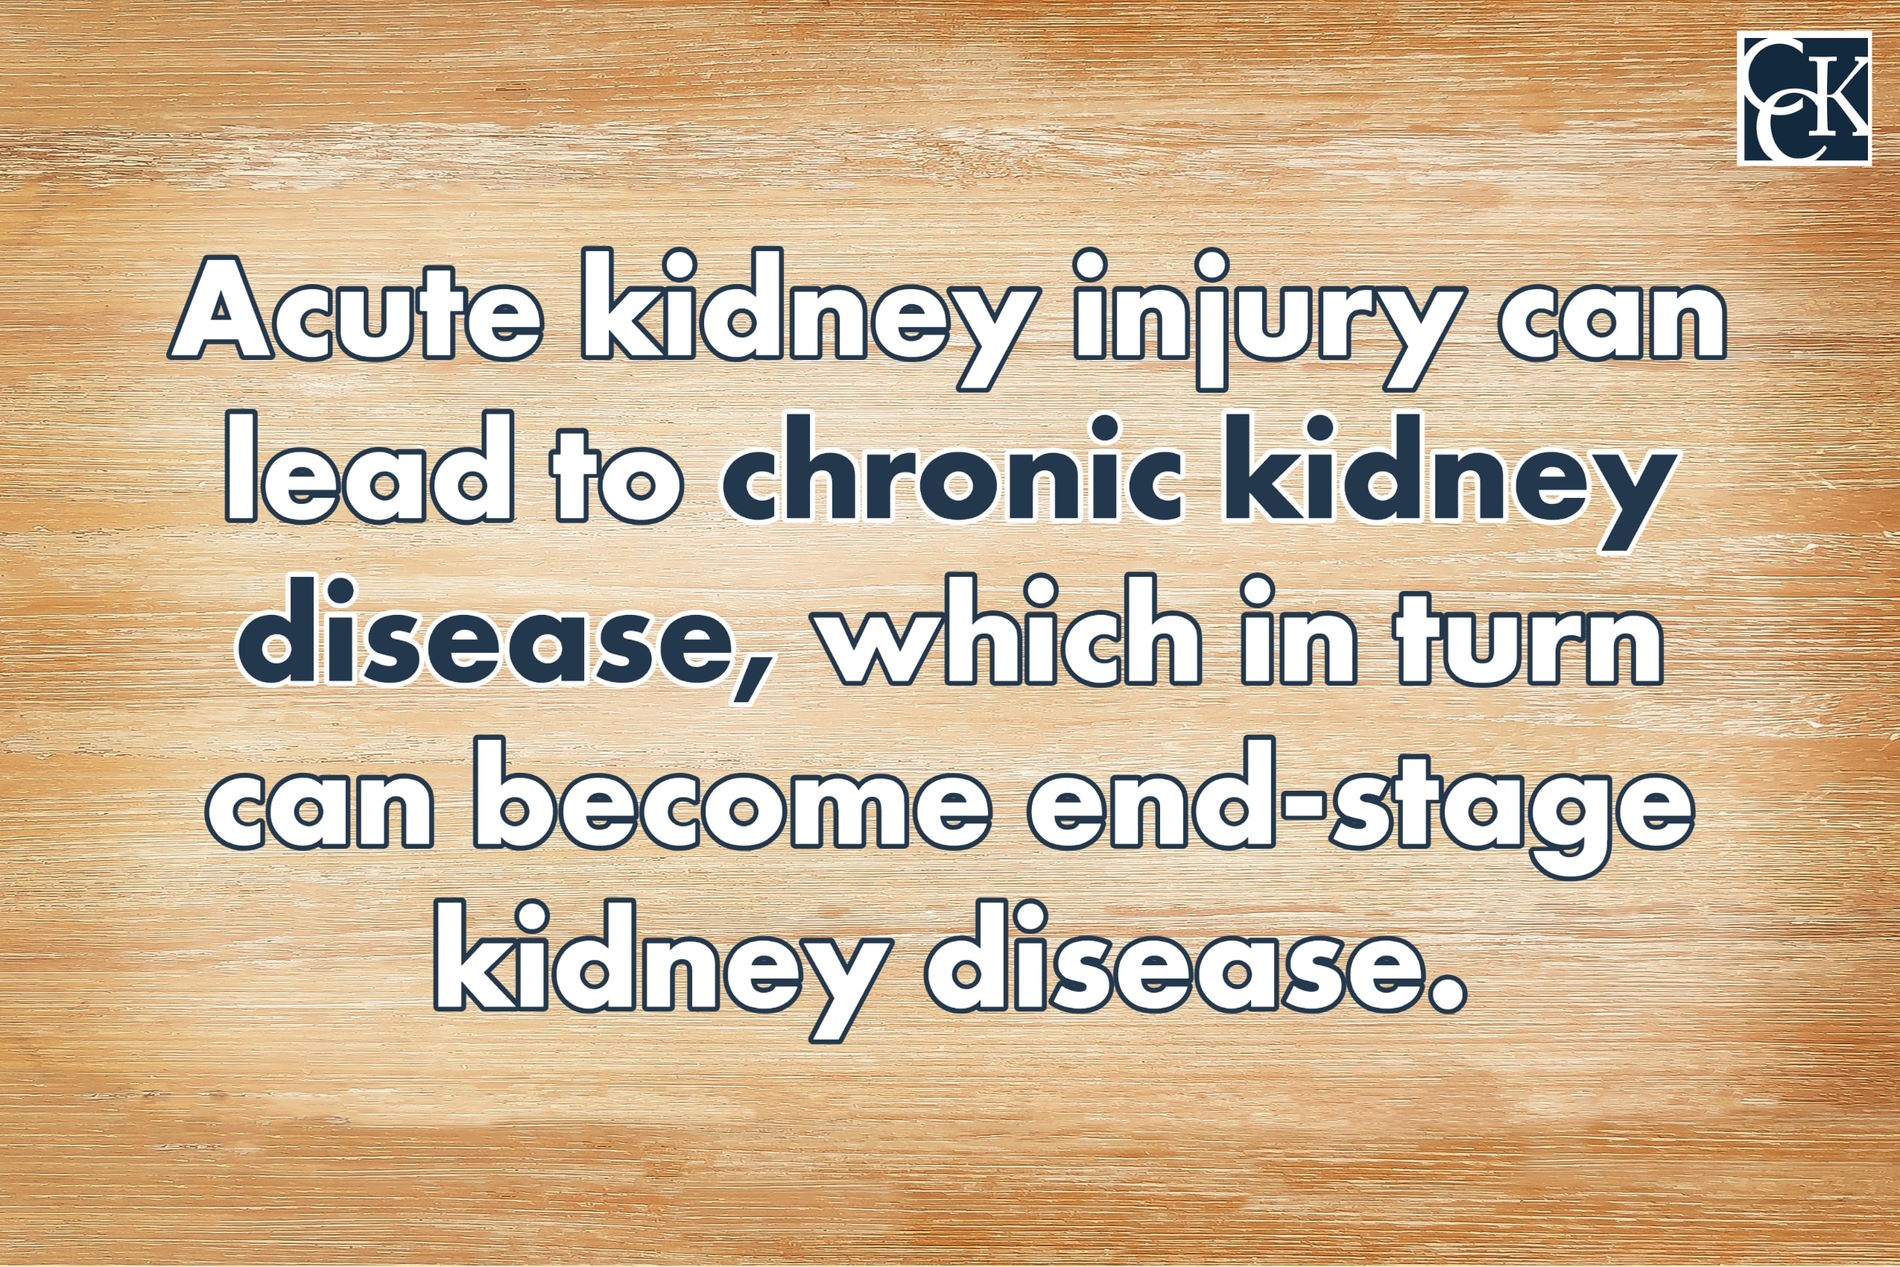 Acute kidney injury can lead to chronic kidney disease, which in turn can become end-stage kidney disease.